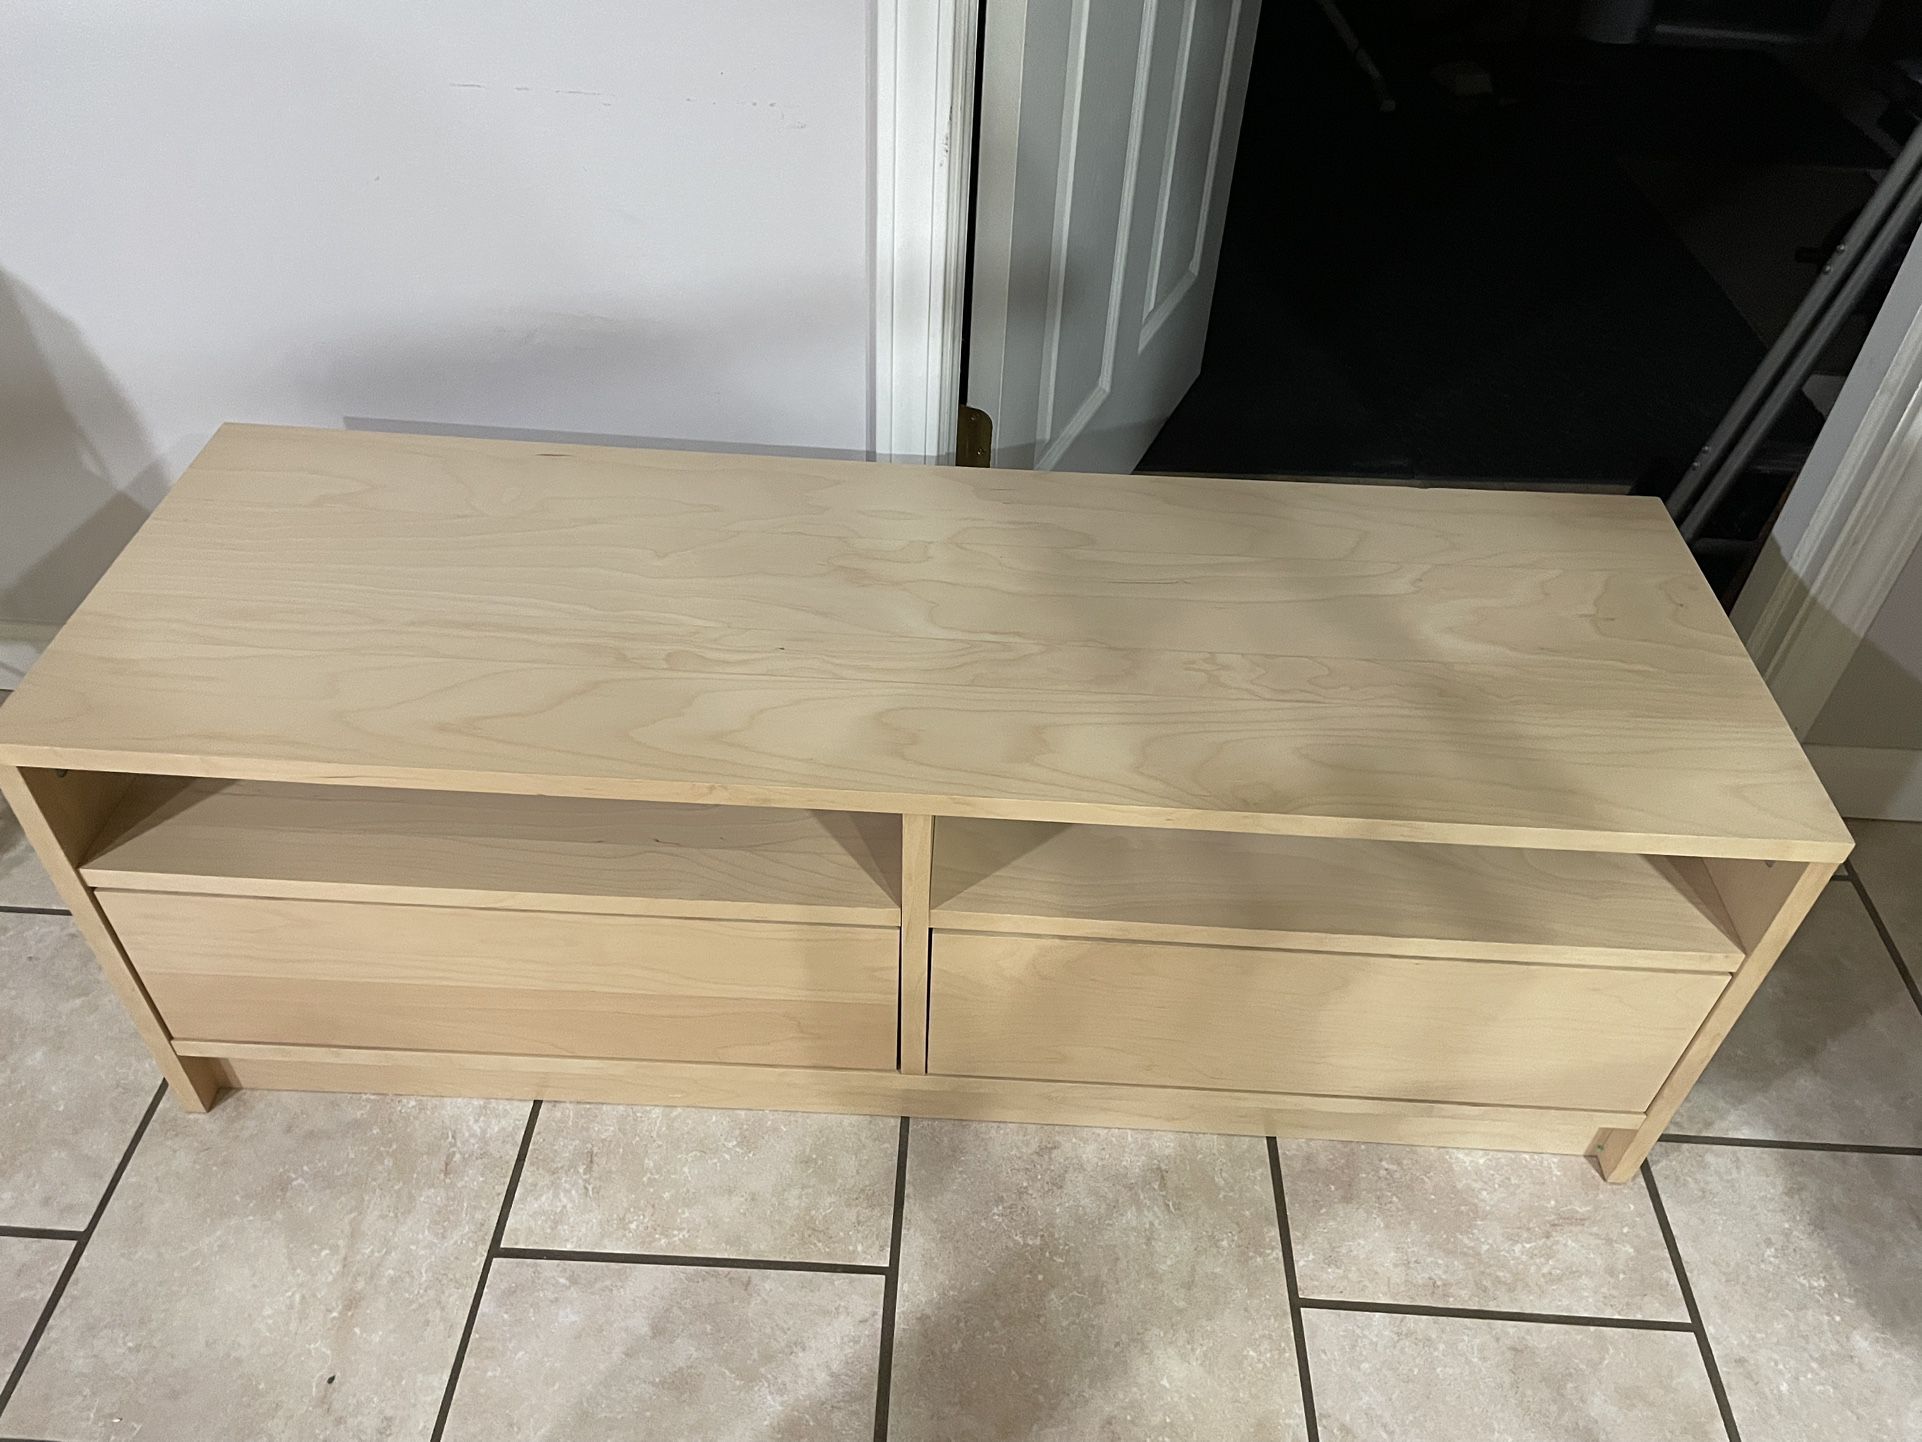 Used  TV Stand $30